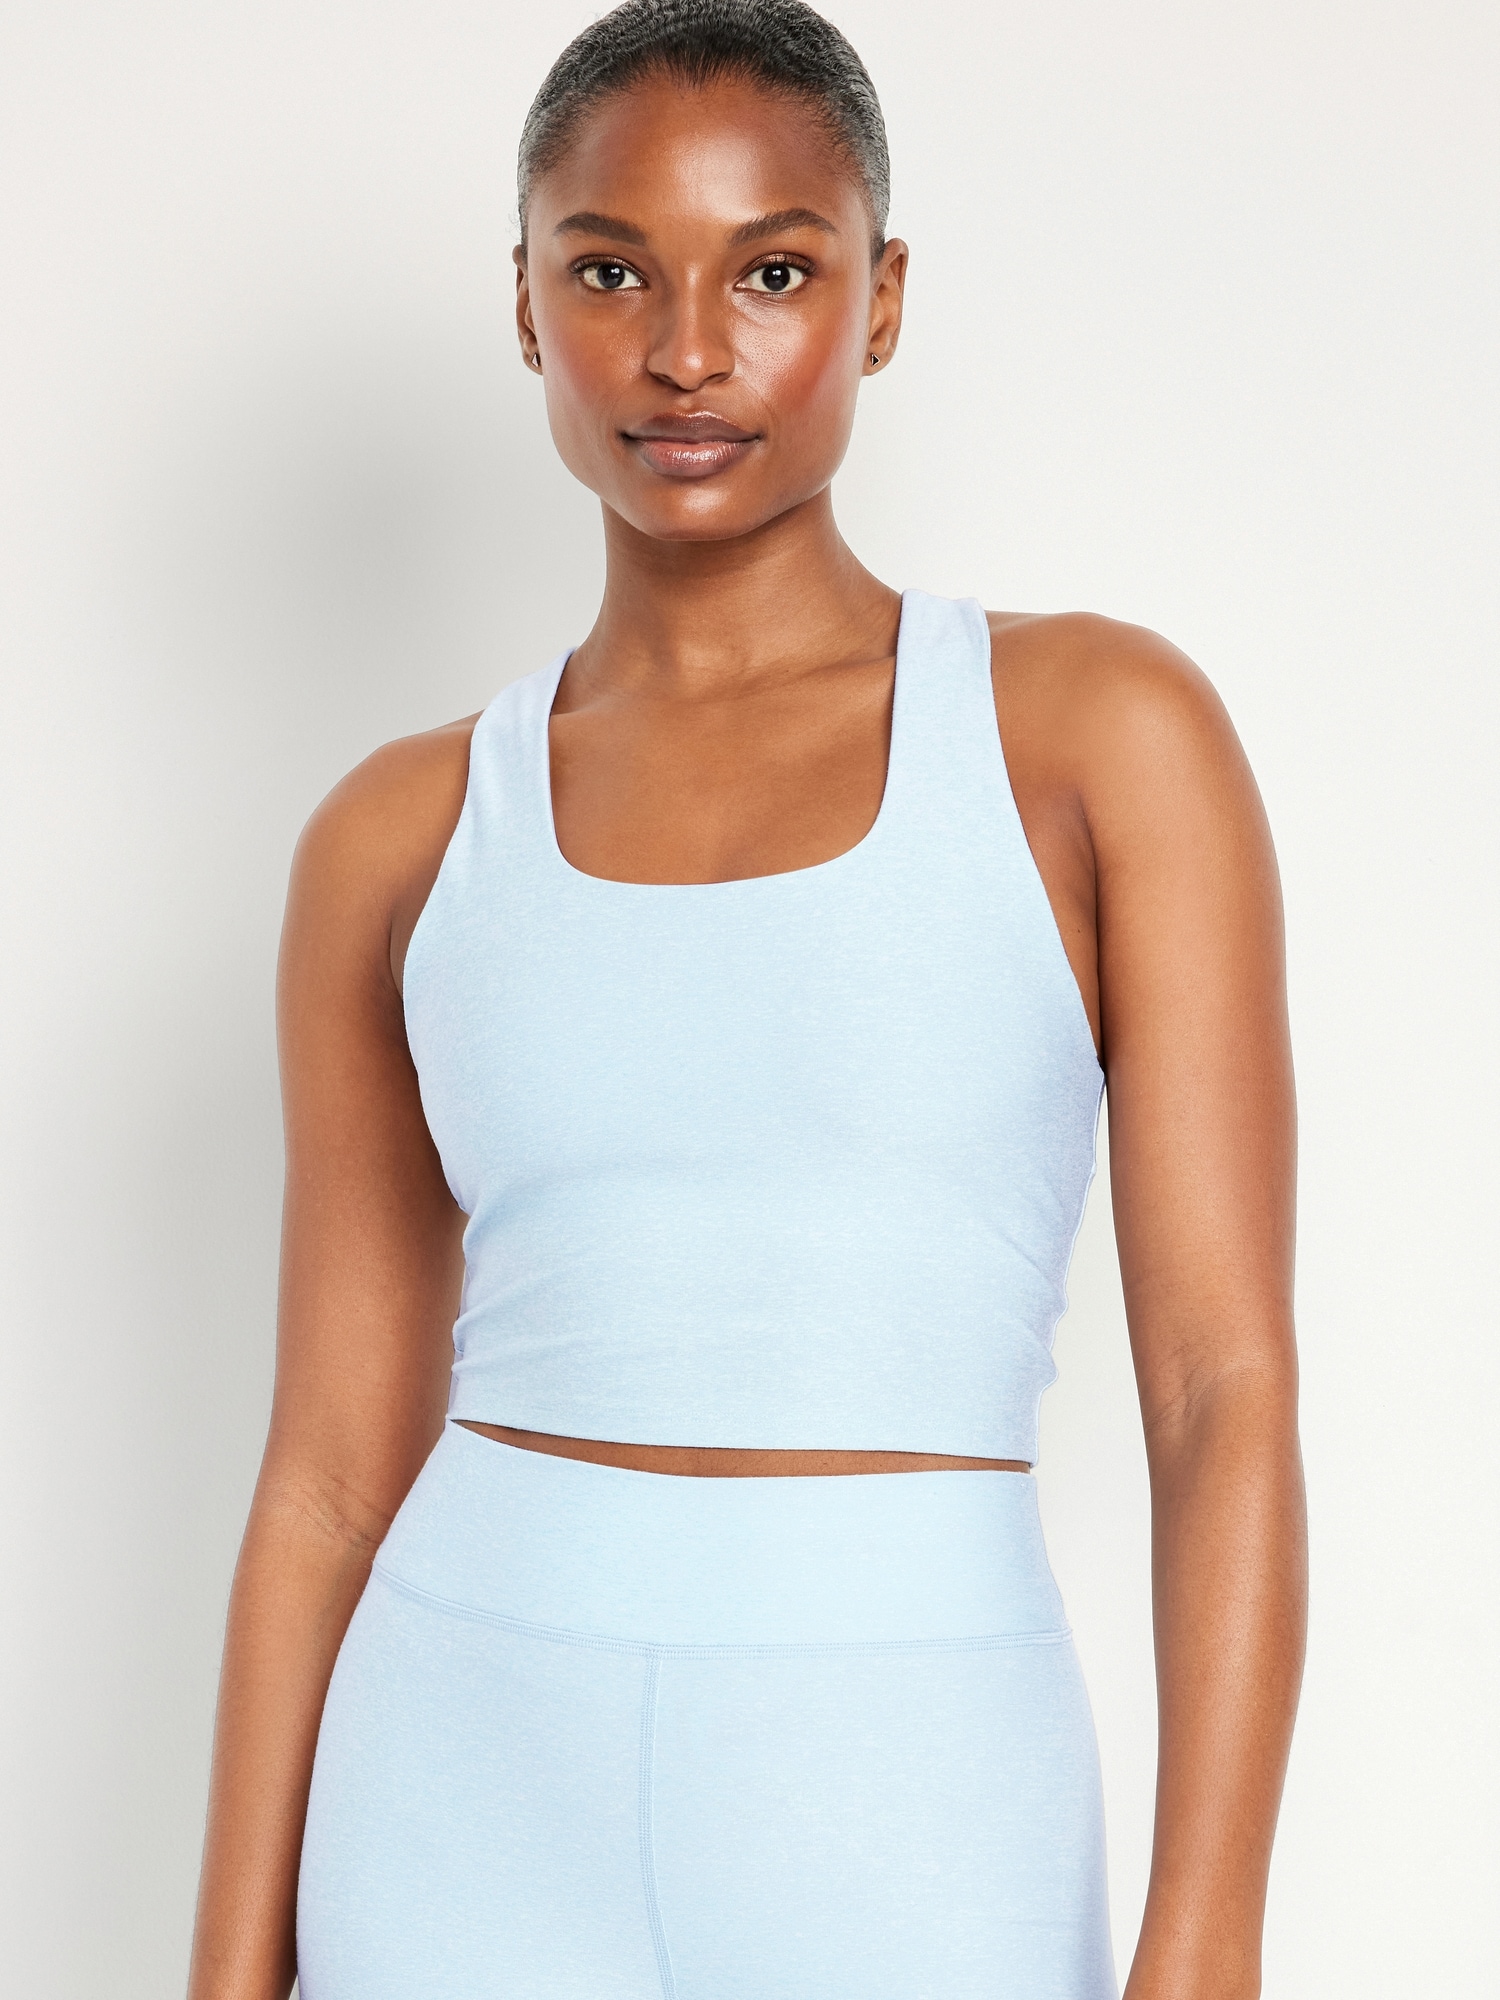 Old Navy Light Support PowerChill Sports Bra, 25 New Activewear Pieces  From Old Navy That You'll Happily Wear Well Into the New Year